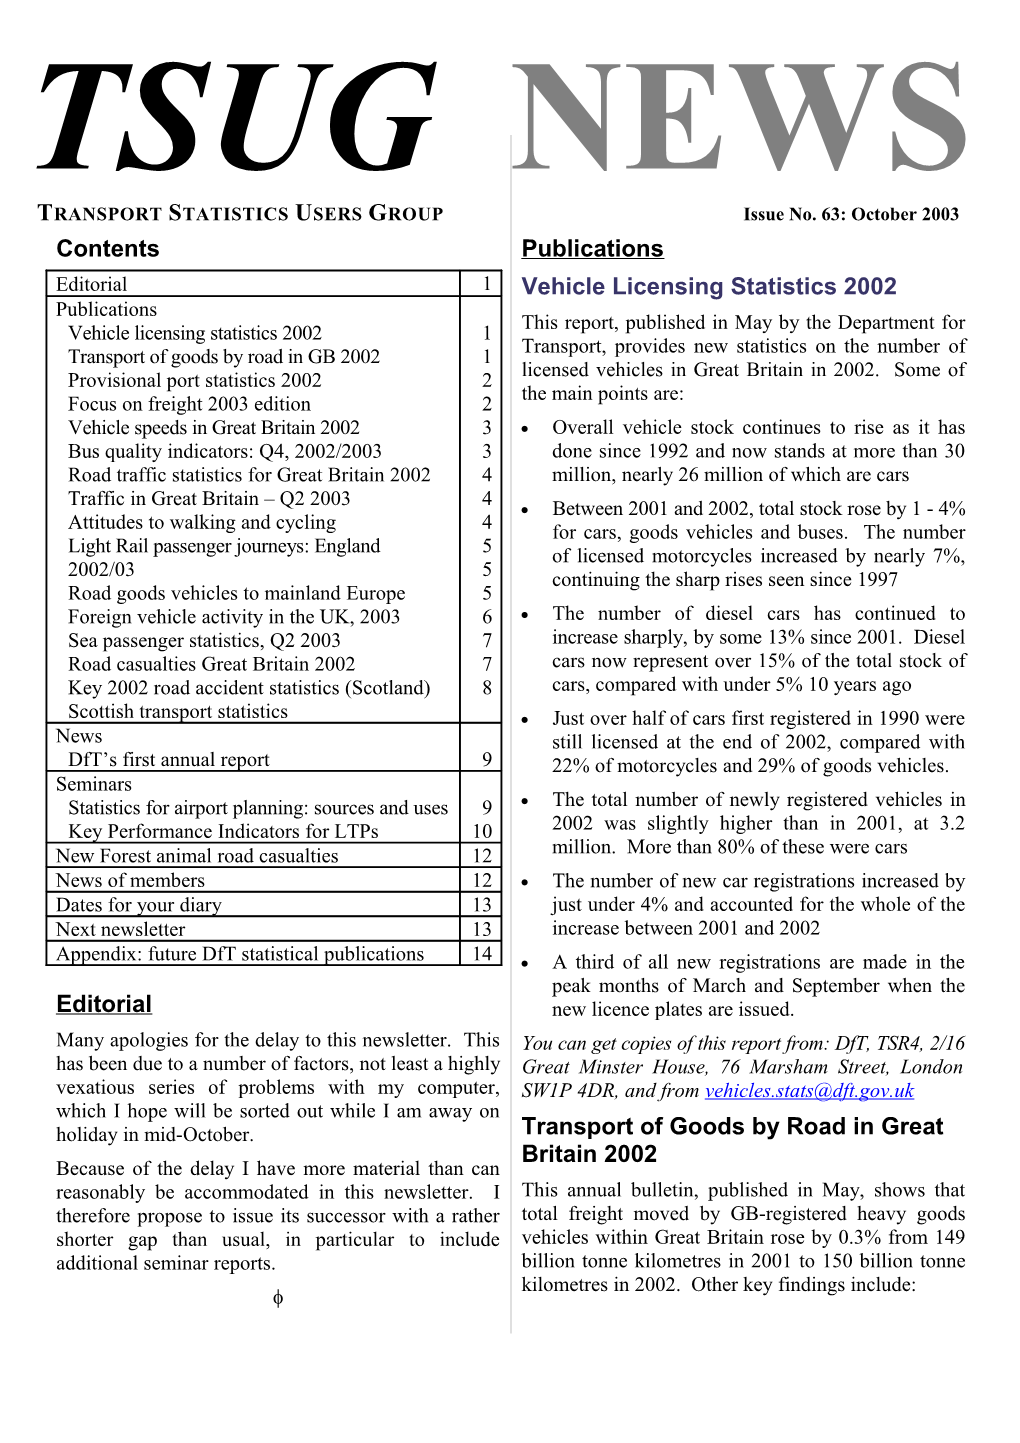 TRANSPORT STATISTICS USERS GROUP Issue No. 63: October 2003